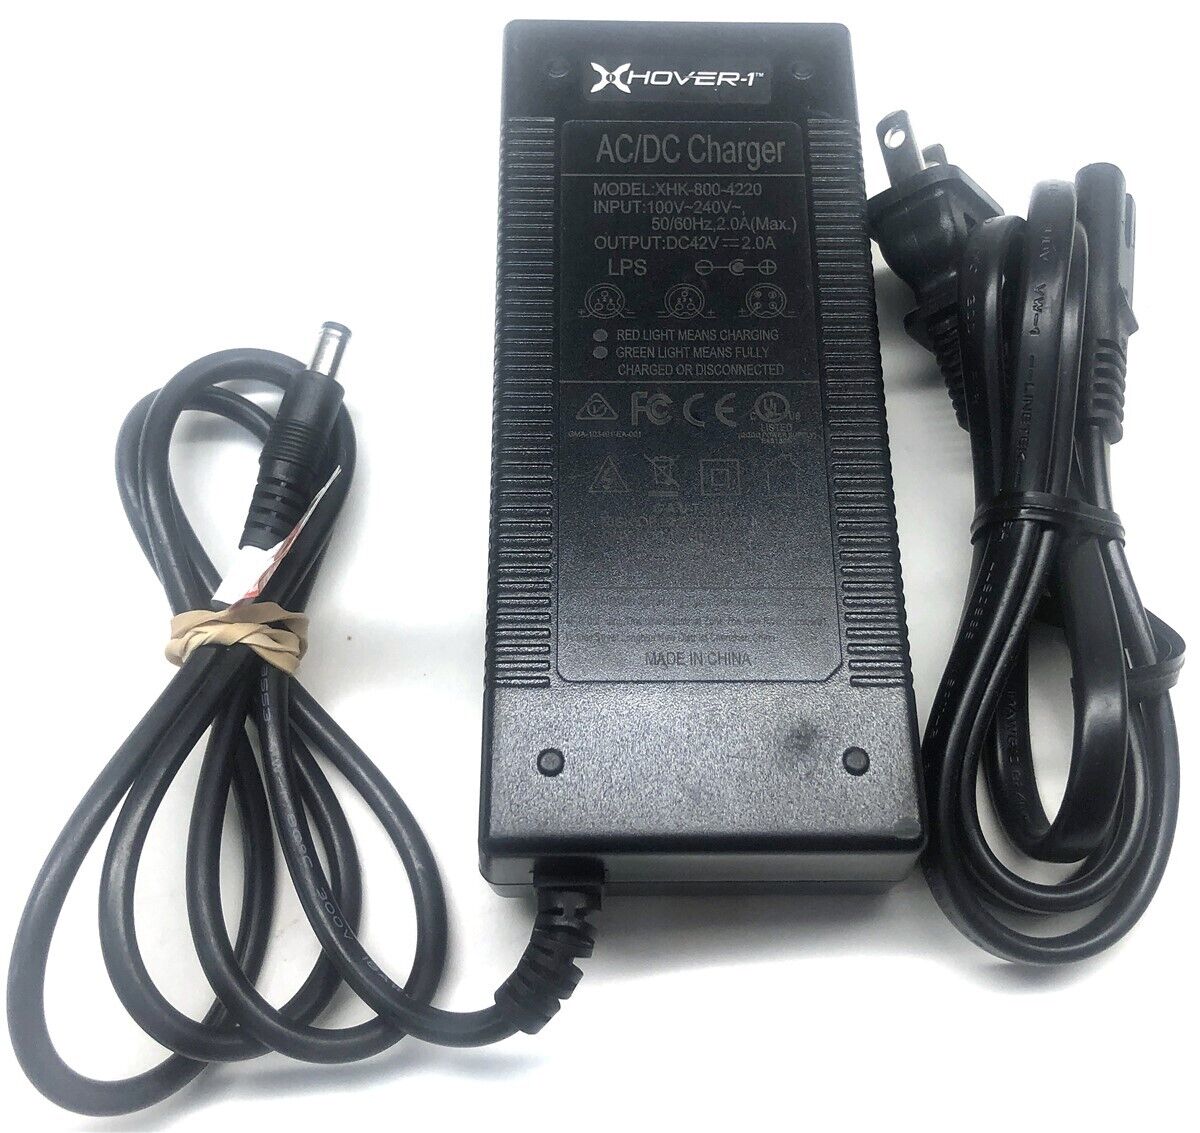 Hover-1 Blackhawk Scooter Charger AC Adapter Power Supply XHK-800-4220 42V 84W Brand Hover-1 Type Switching Power Suppl